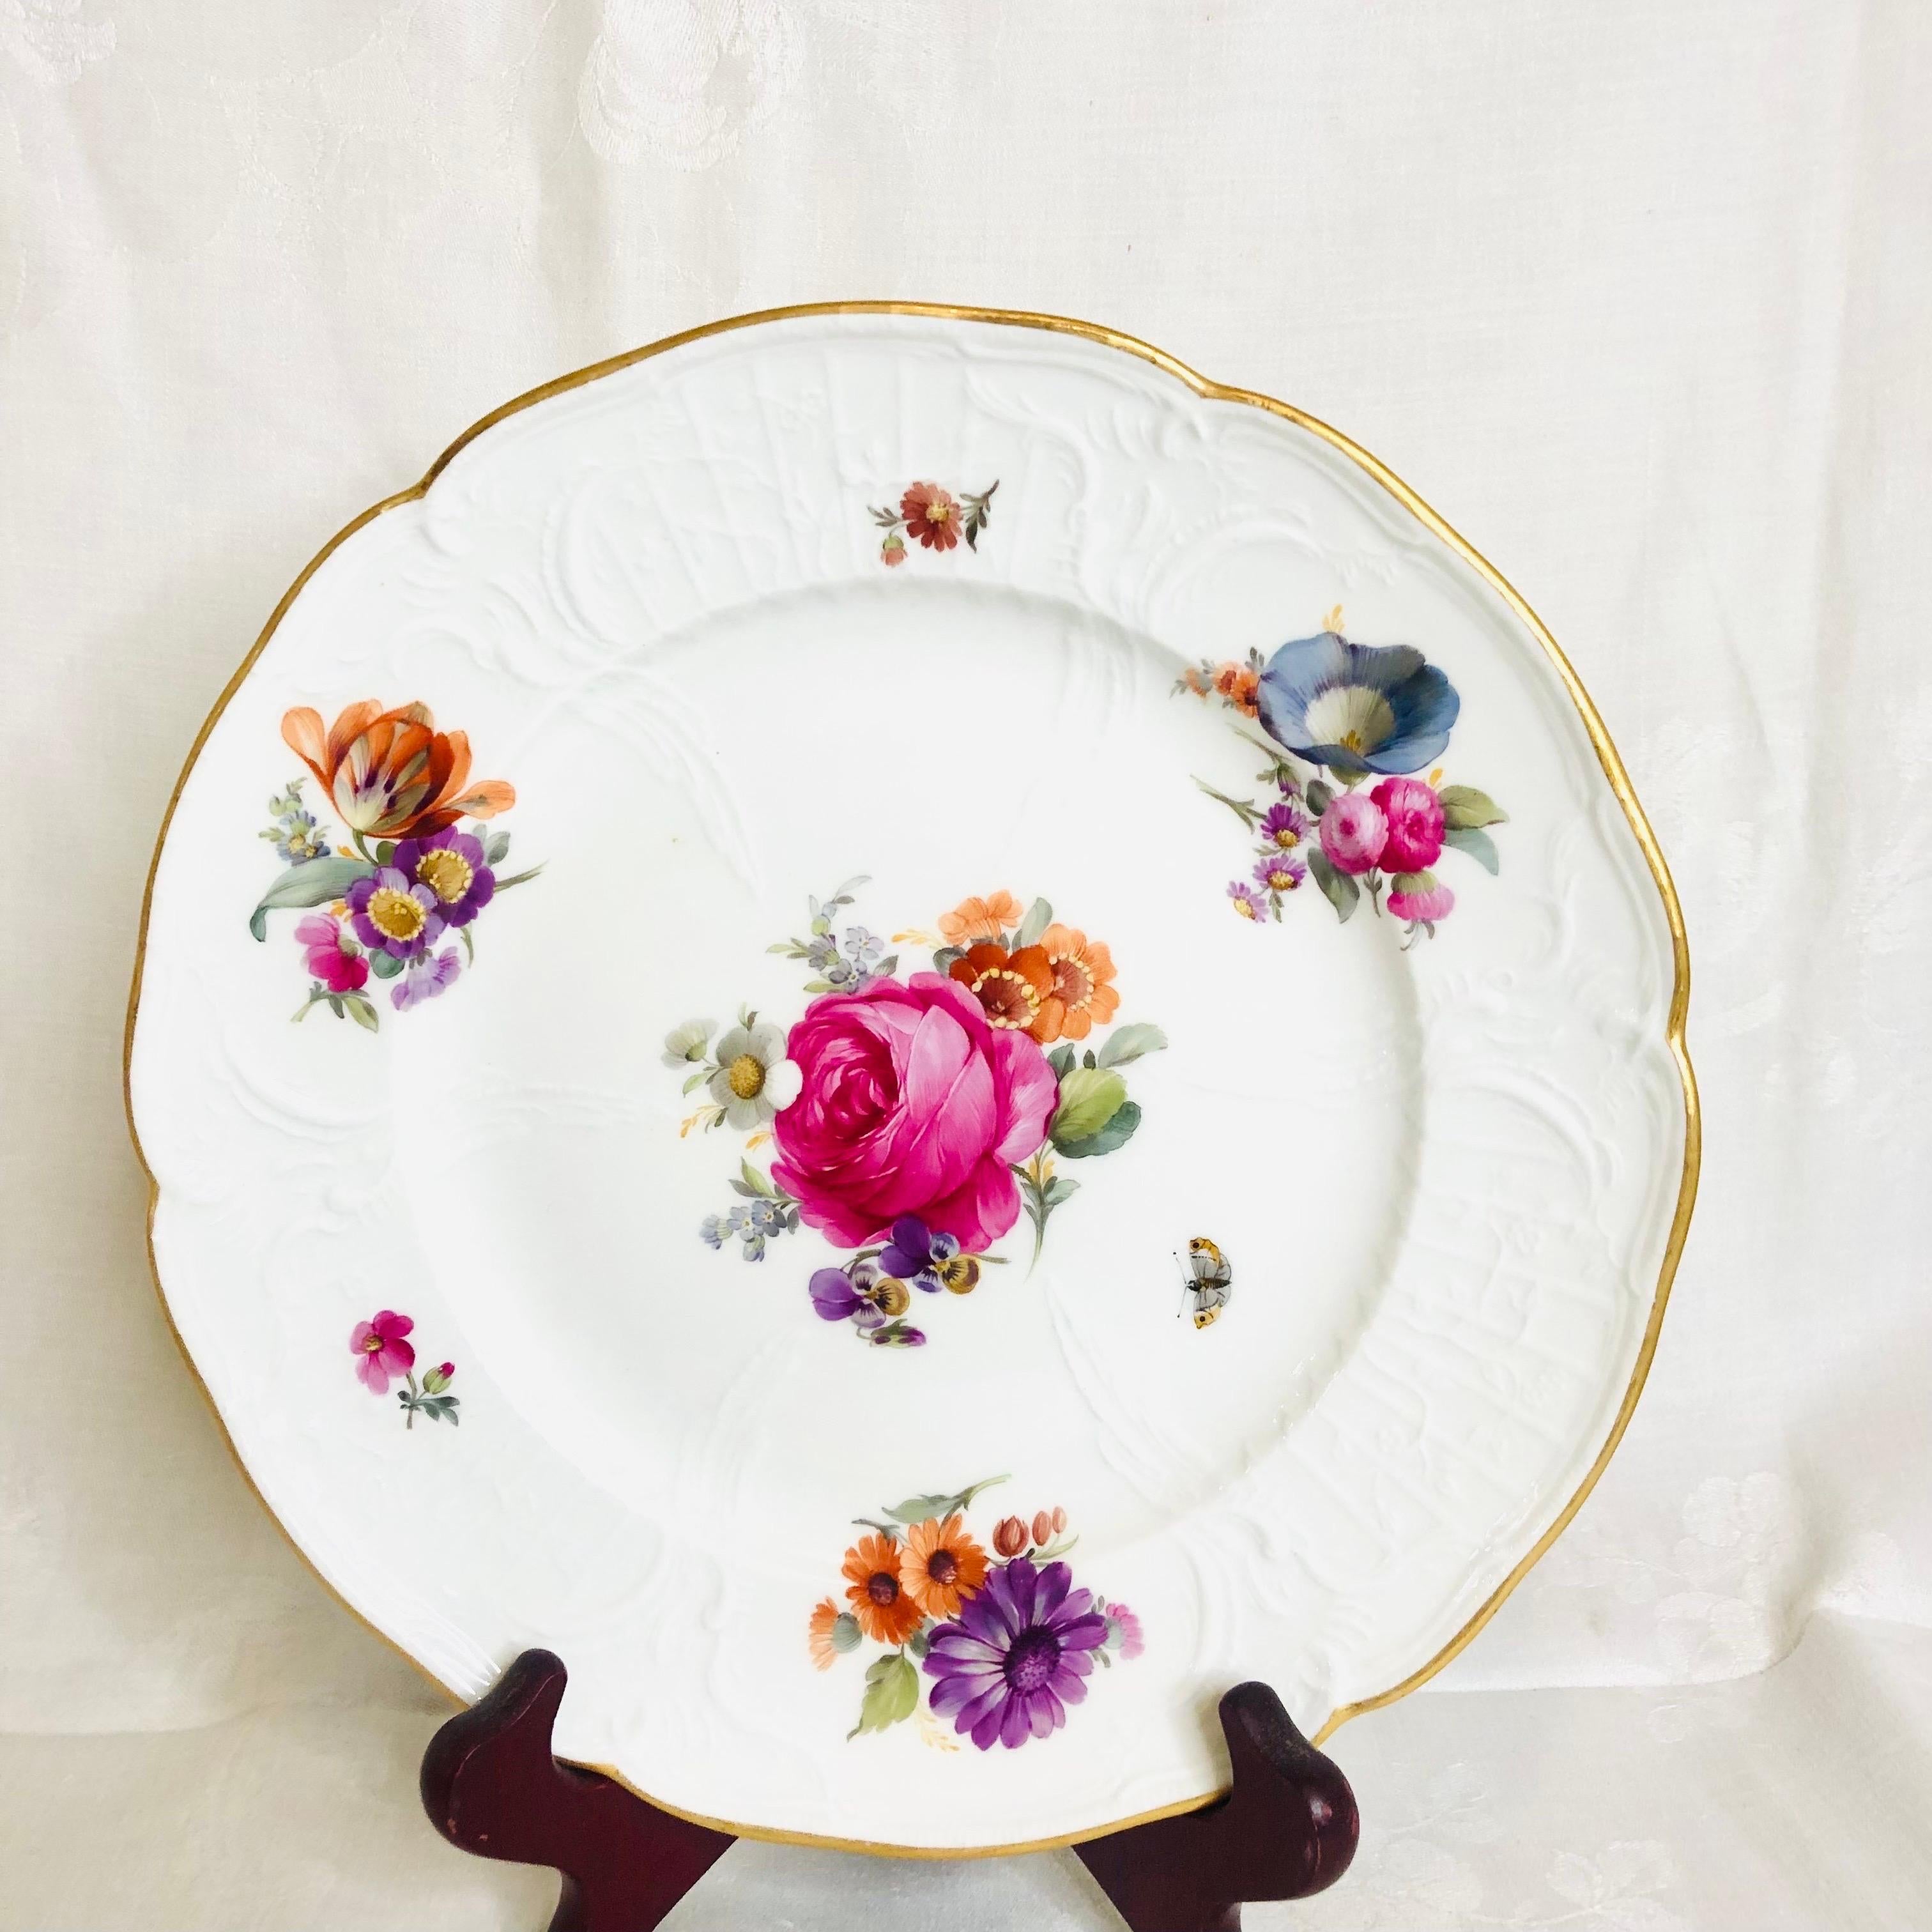 Set of 8 KPM Luncheon Plates Each Hand-Painted with a Different Flower Bouquet For Sale 2